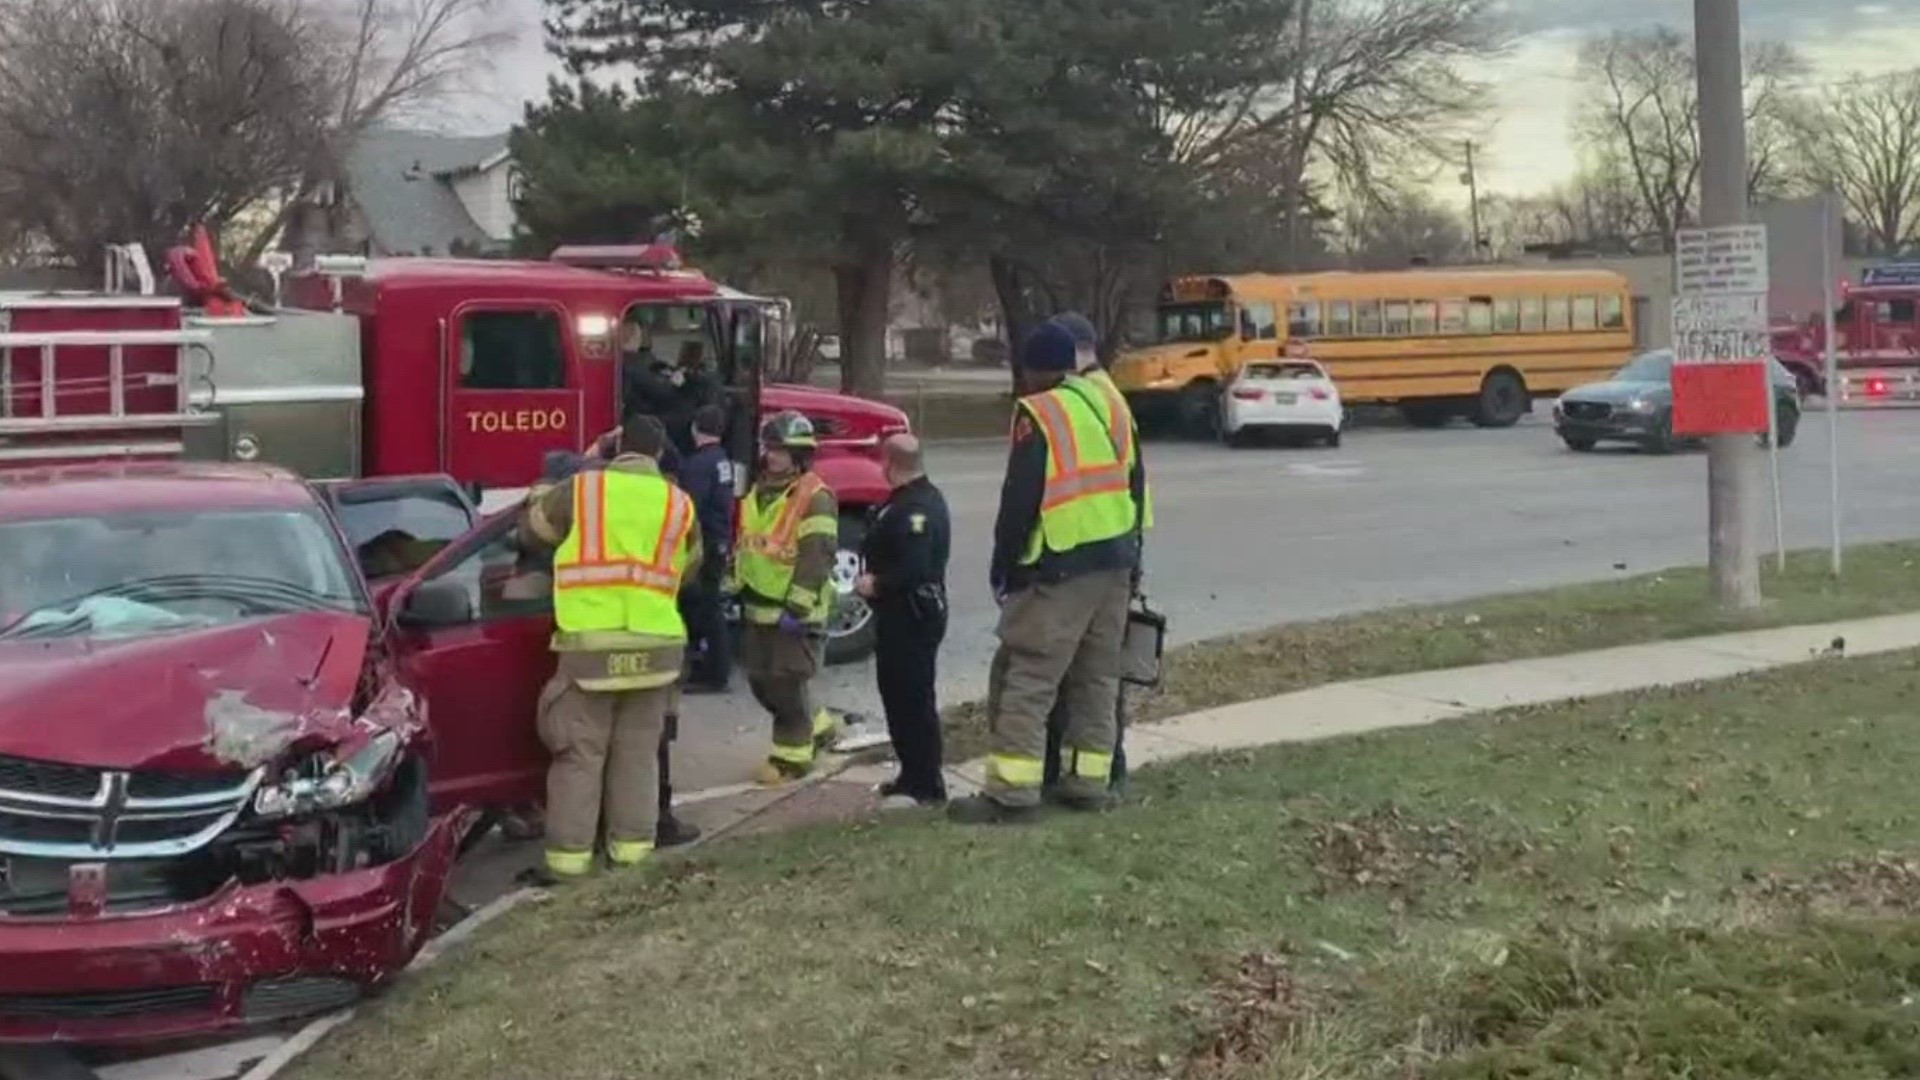 The crash involved at least two vehicles and the TPS bus. The bus was unloading students when hit by a car involved in another collision, Toledo police said.